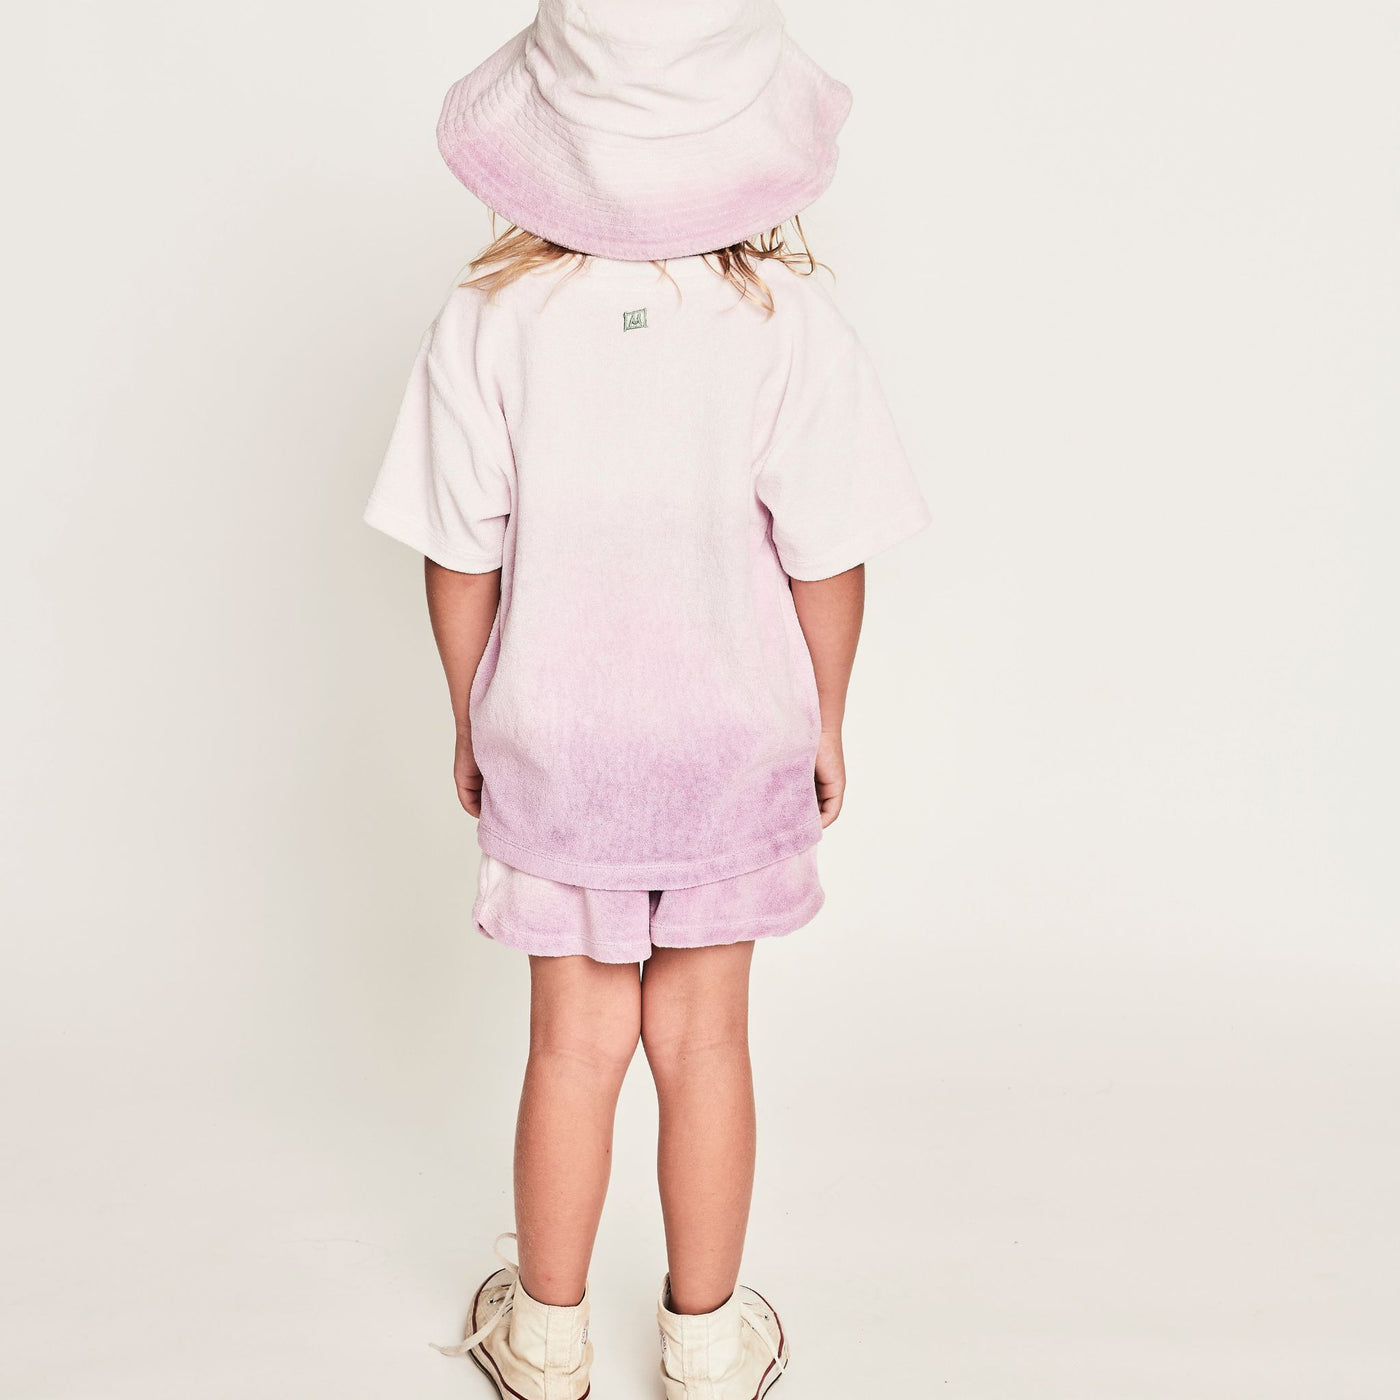 Missie Munster Blossom Tee in Lilac Dip Dye